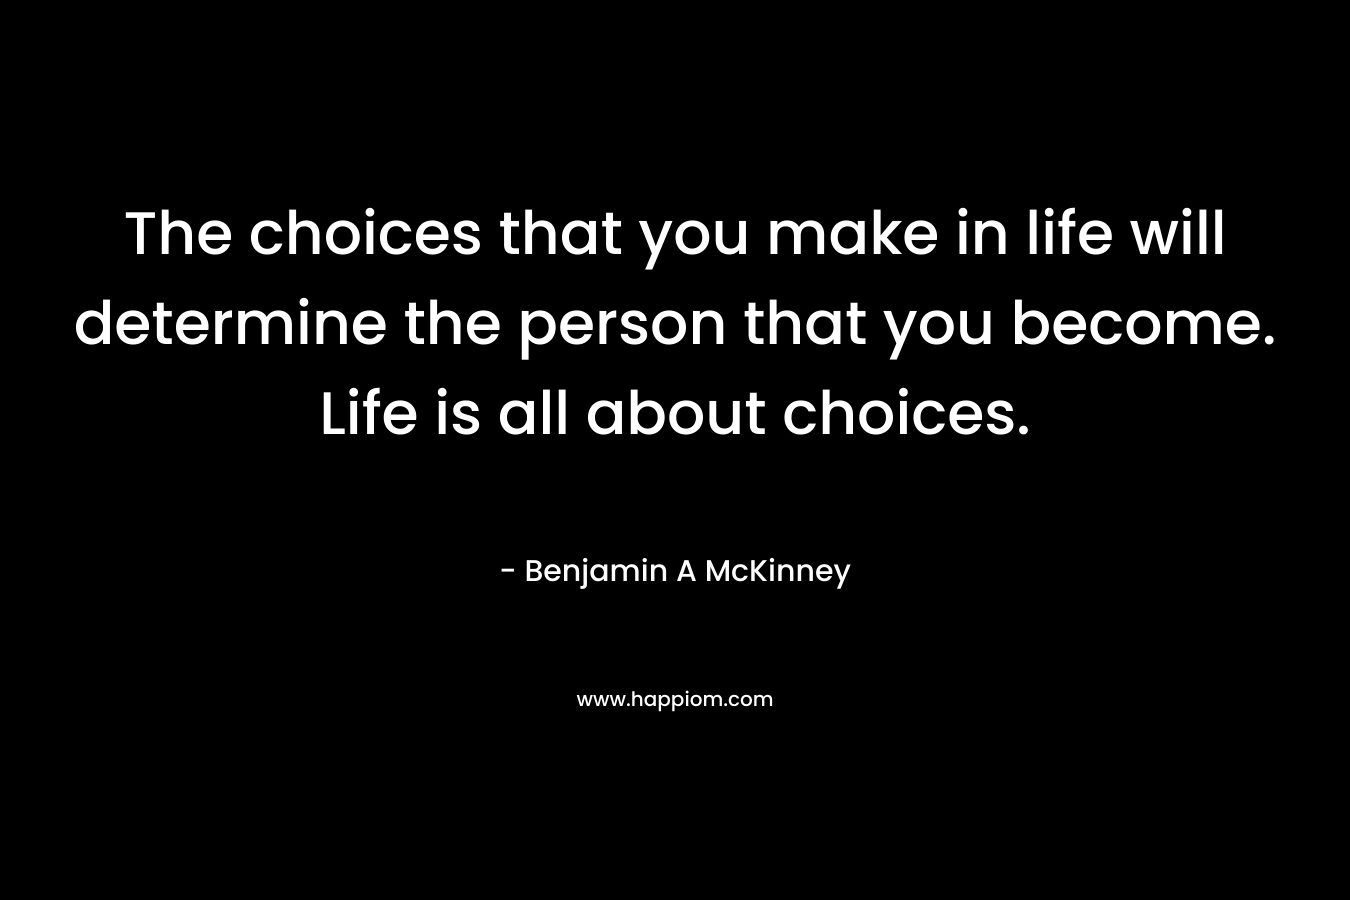 The choices that you make in life will determine the person that you become. Life is all about choices.